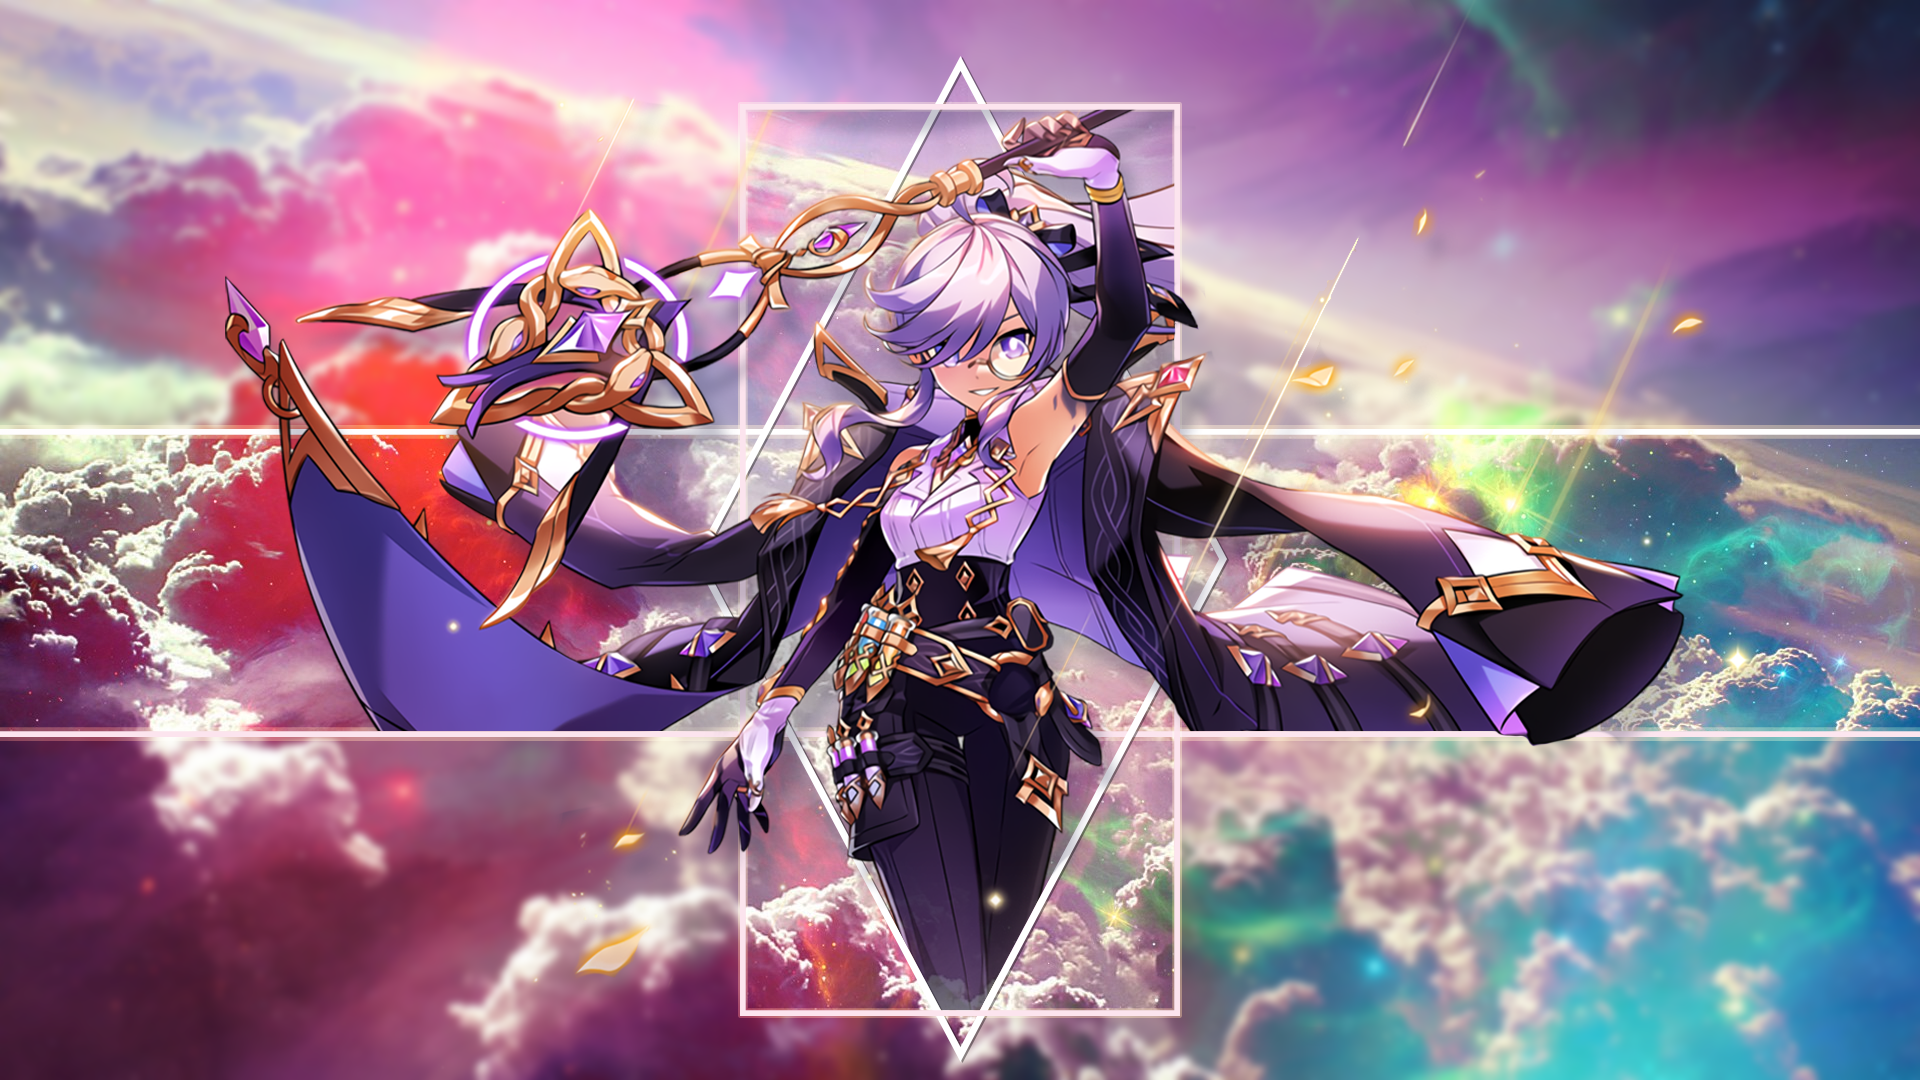 Anime 1920x1080 Elsword Aisha (Elsword) anime girls picture-in-picture clouds stars space fantasy art